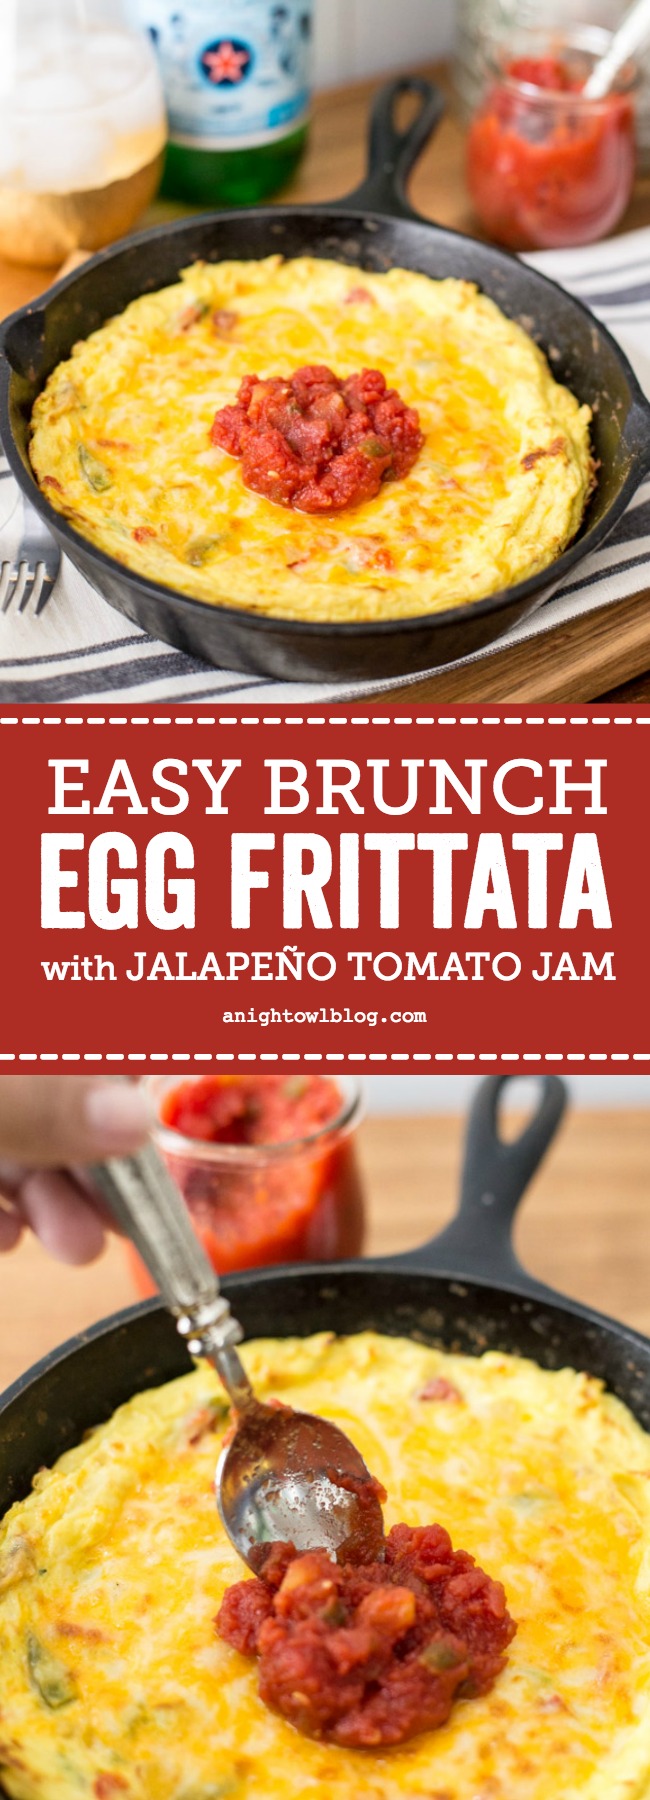 This easy Egg Frittata is delicious as a hearty breakfast or brunch dish and is ready to enjoy in 30 minutes with a zesty and easy Jalapeño Tomato Jam. #BreakfastRecipes #BrunchRecipes